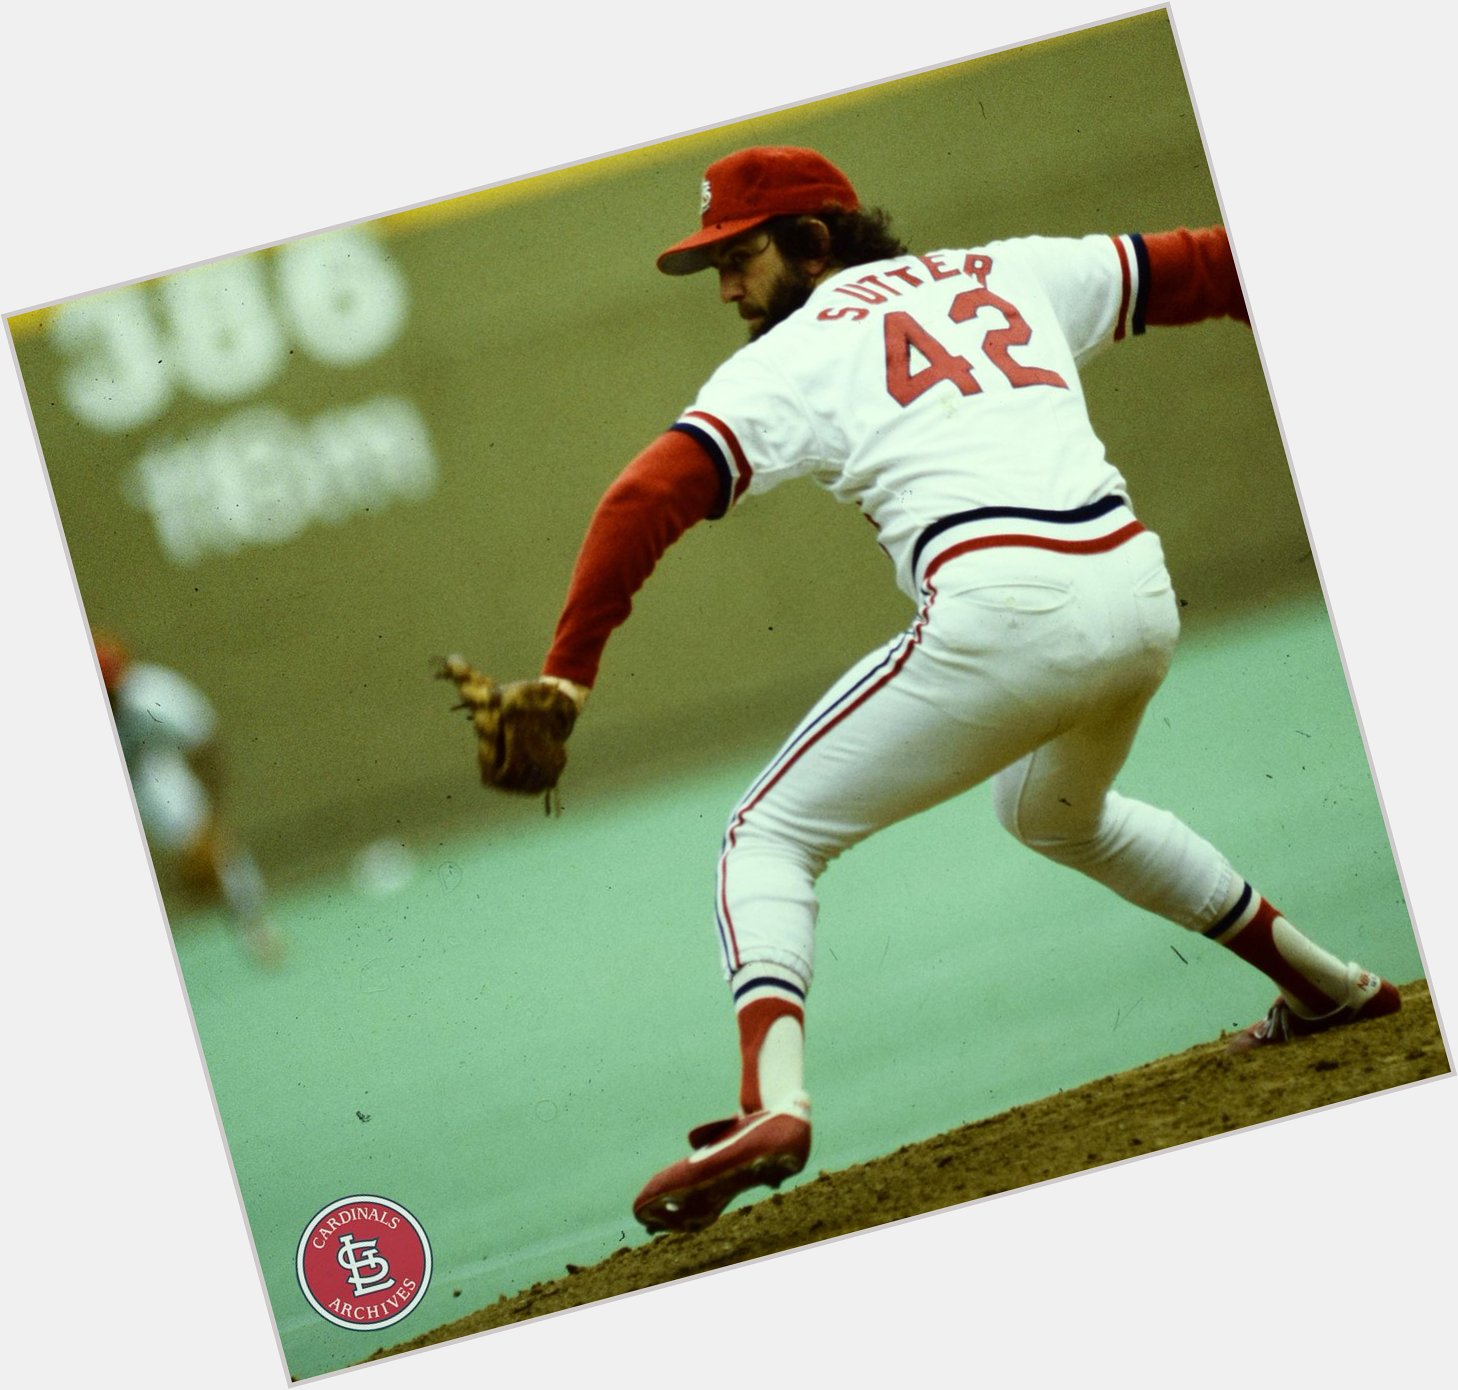 Happy 64th birthday to Hall of Famer and 1982 World Champion pitcher Bruce Sutter! 